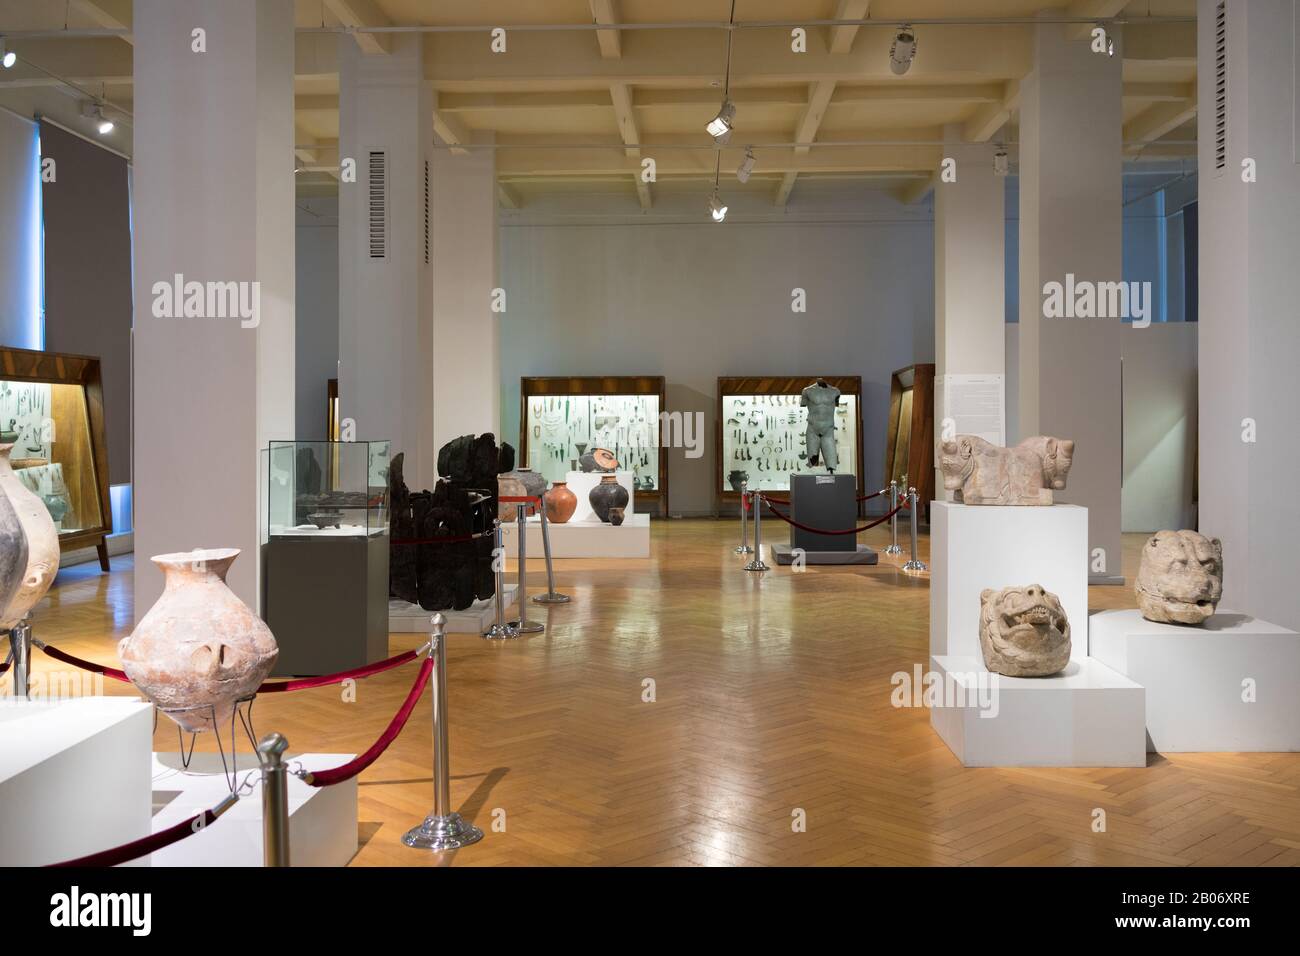 Tbilisi, Georgia - Febr 18, 2020: Exhibition in the Georgian National Museum, Tbilisi, Georgia. The Georgian National Museum unifies several leading m Stock Photo